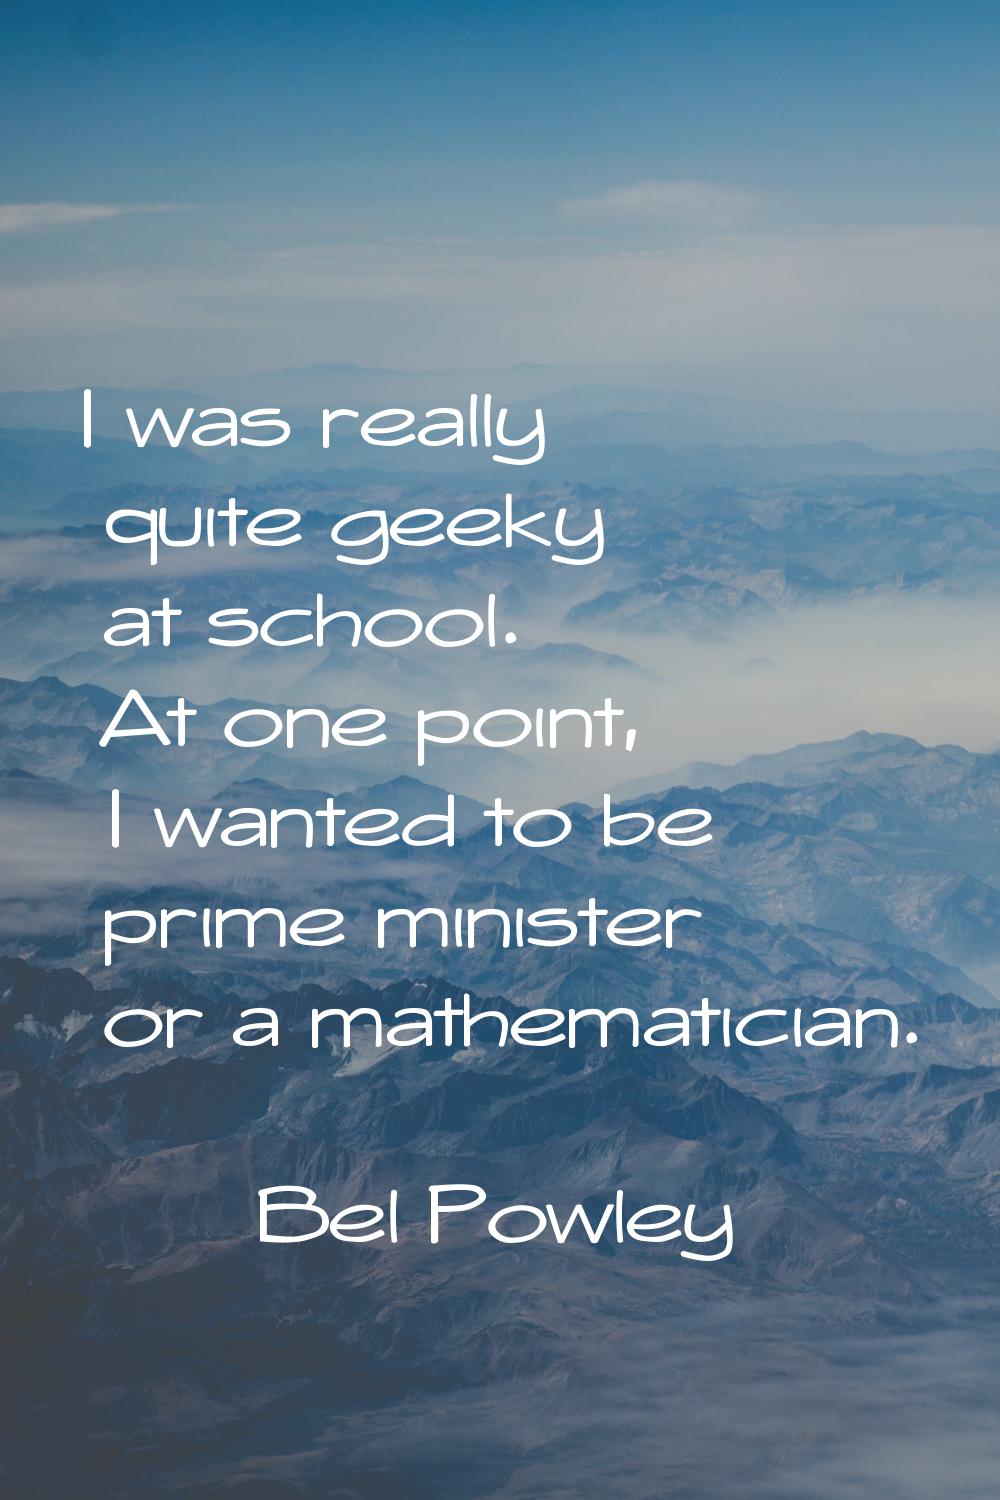 I was really quite geeky at school. At one point, I wanted to be prime minister or a mathematician.